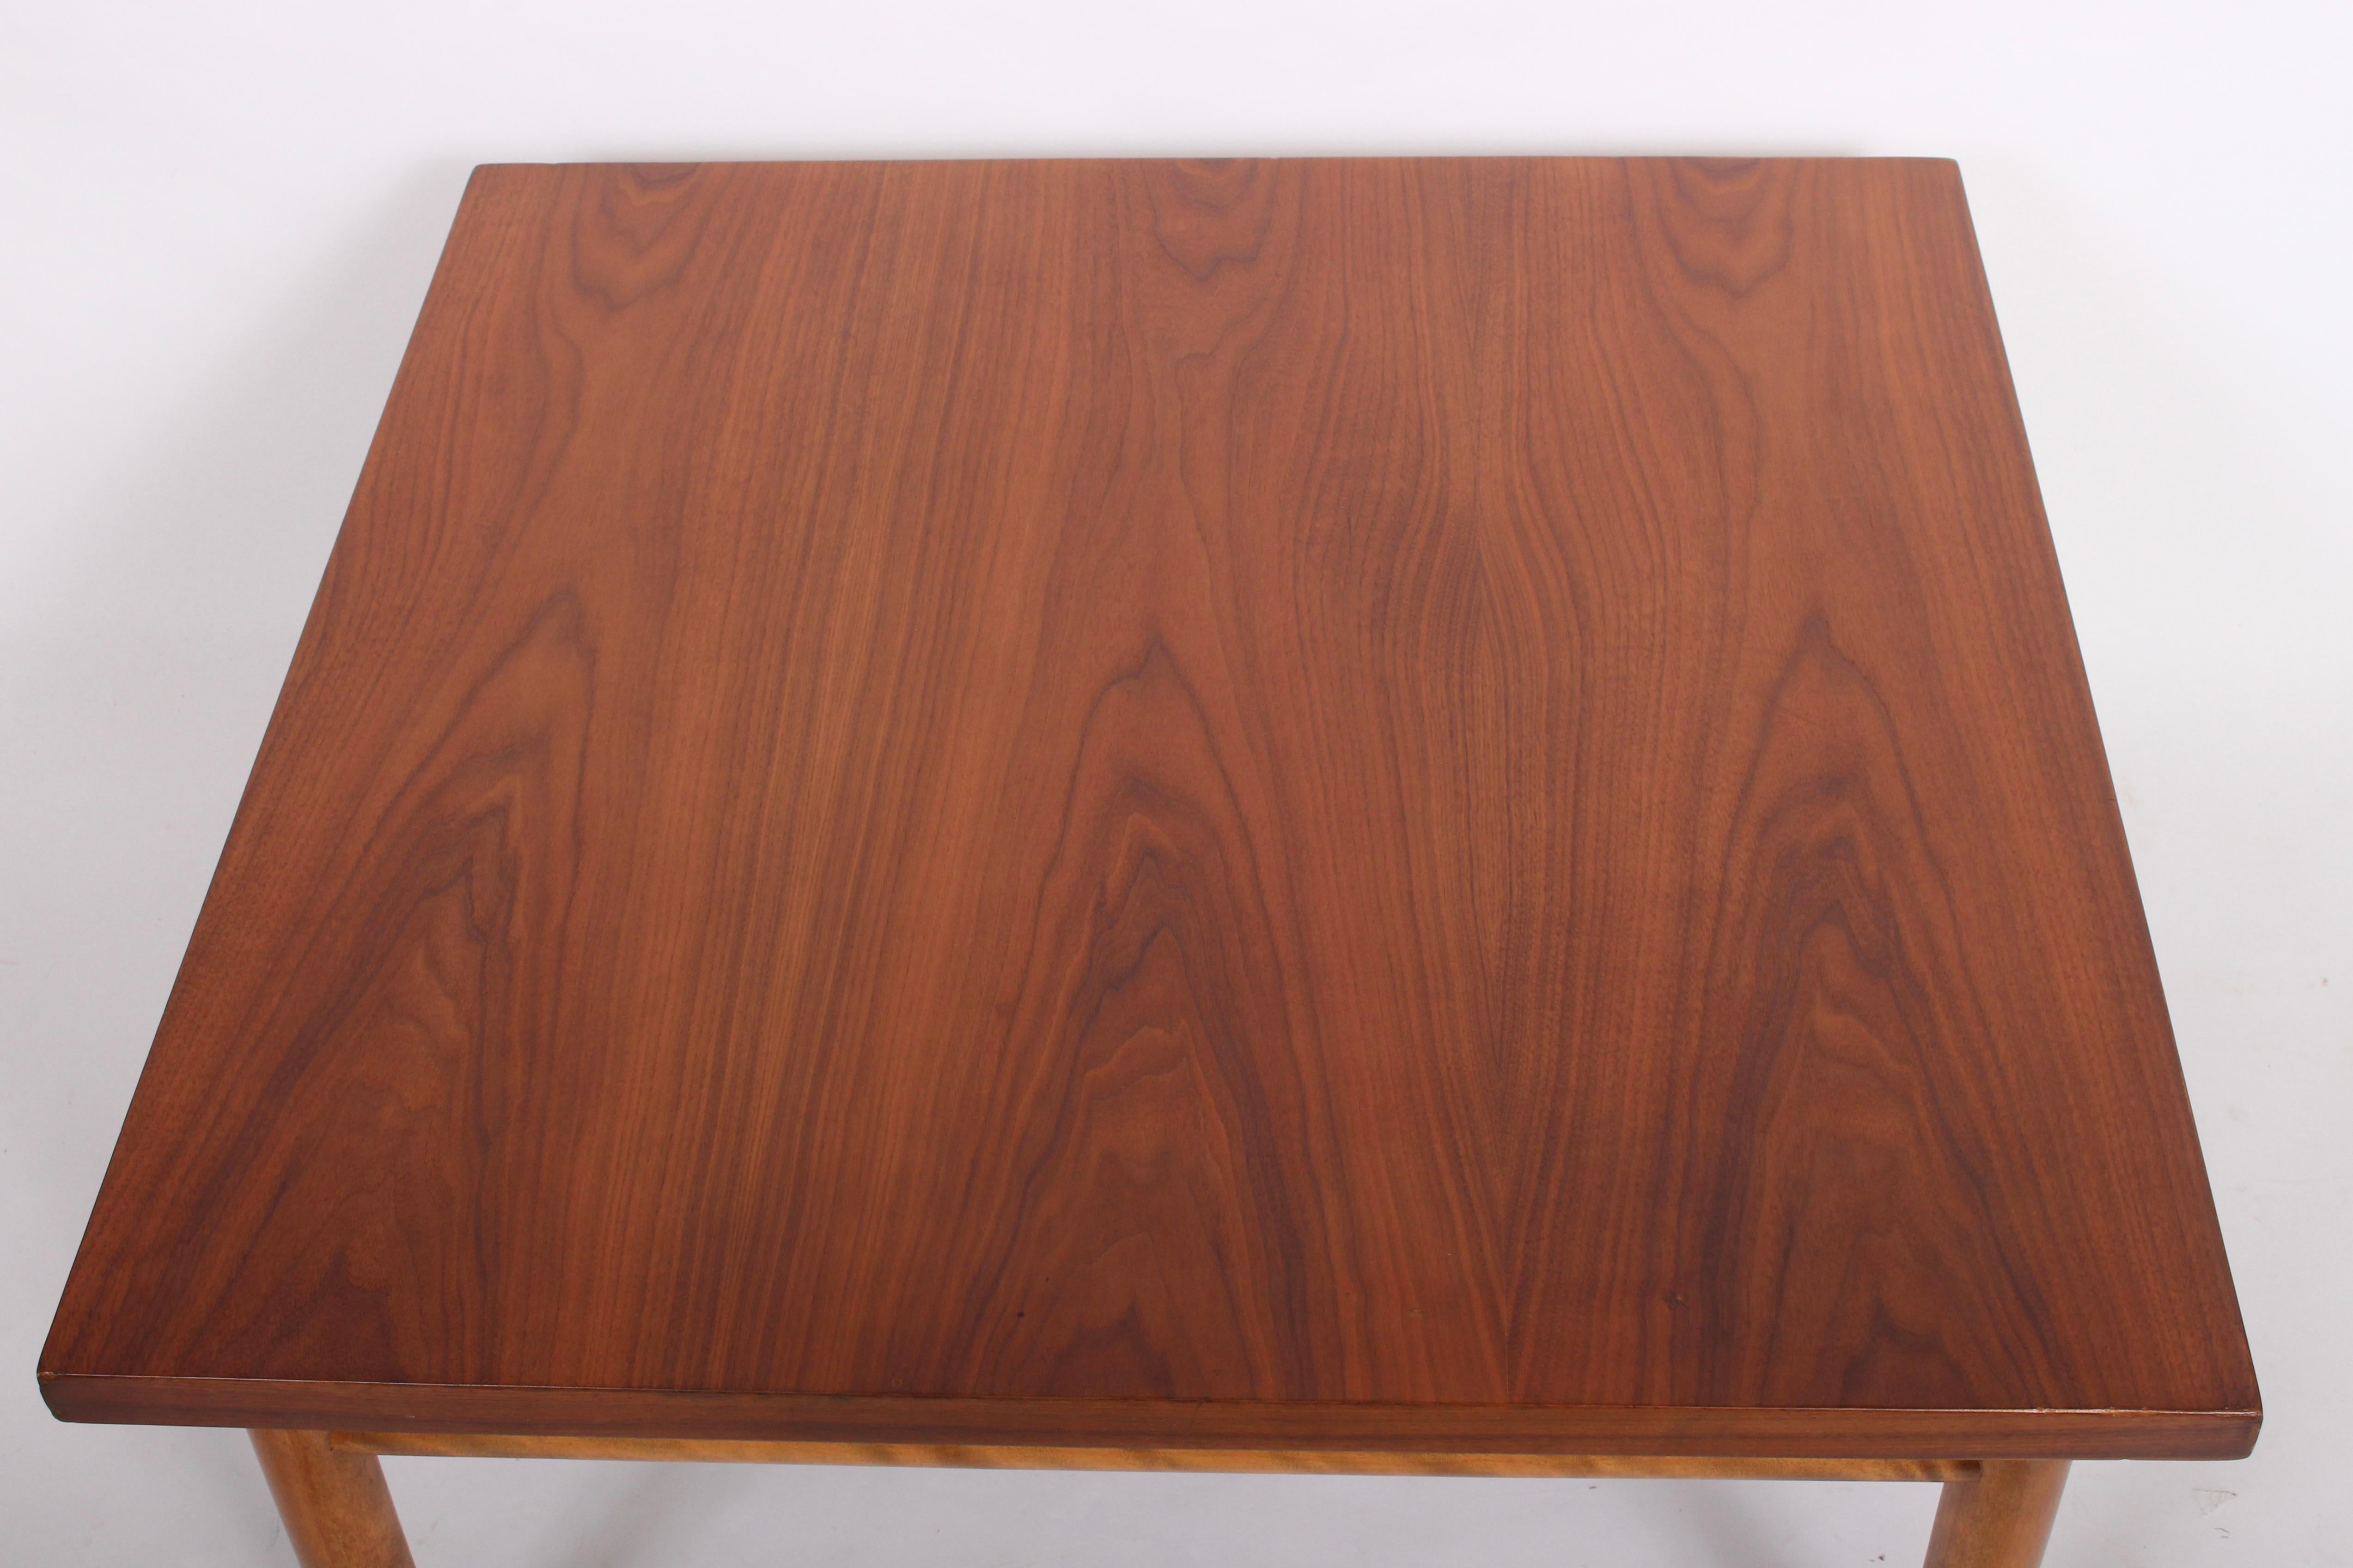 T. H. Robsjohn Gibbings for Widdicomb square mahogany Coffee Table. Side Table. Circa 1960. Featuring a solid board surface, beautifully grained Mahogany veneer, with solid turned mahogany framework and legs. Newly refinished.  Classic. American Mid